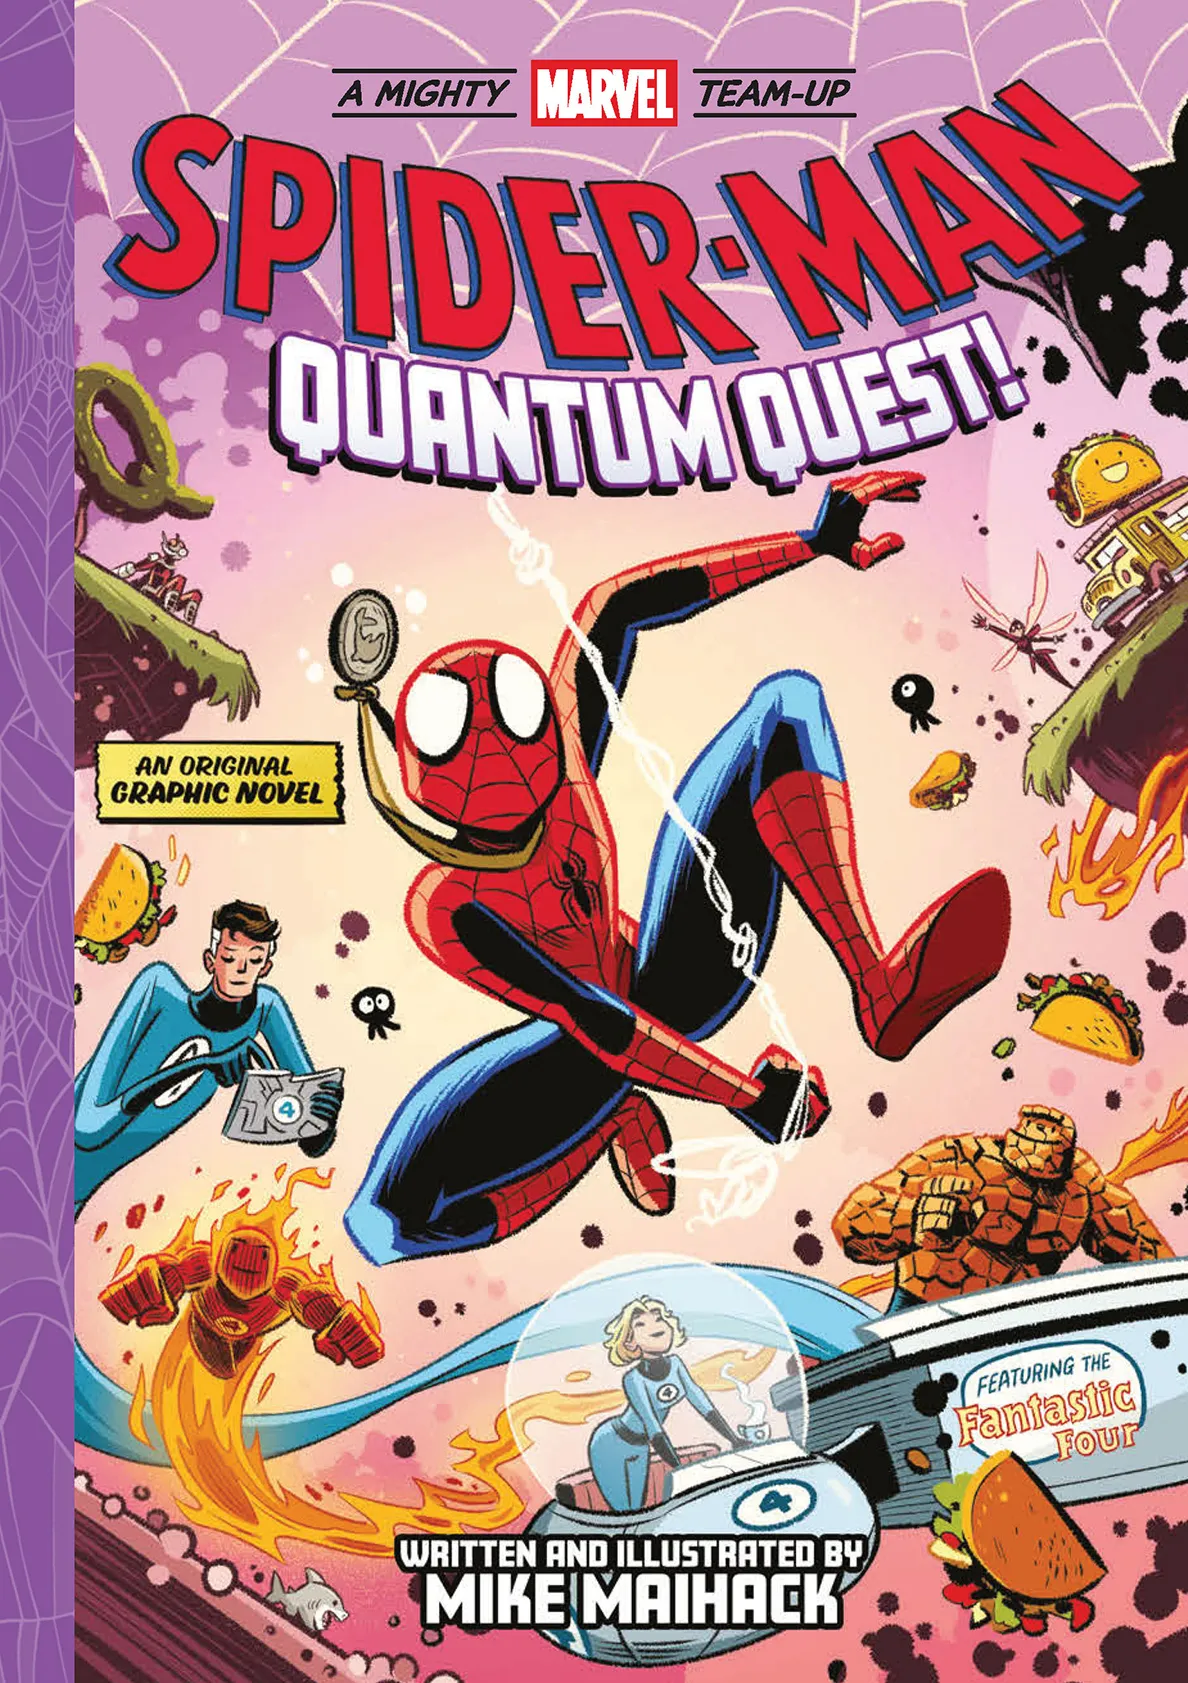 Spider-Man: Quantum Quest! (A Mighty Marvel Team-Up # 2)